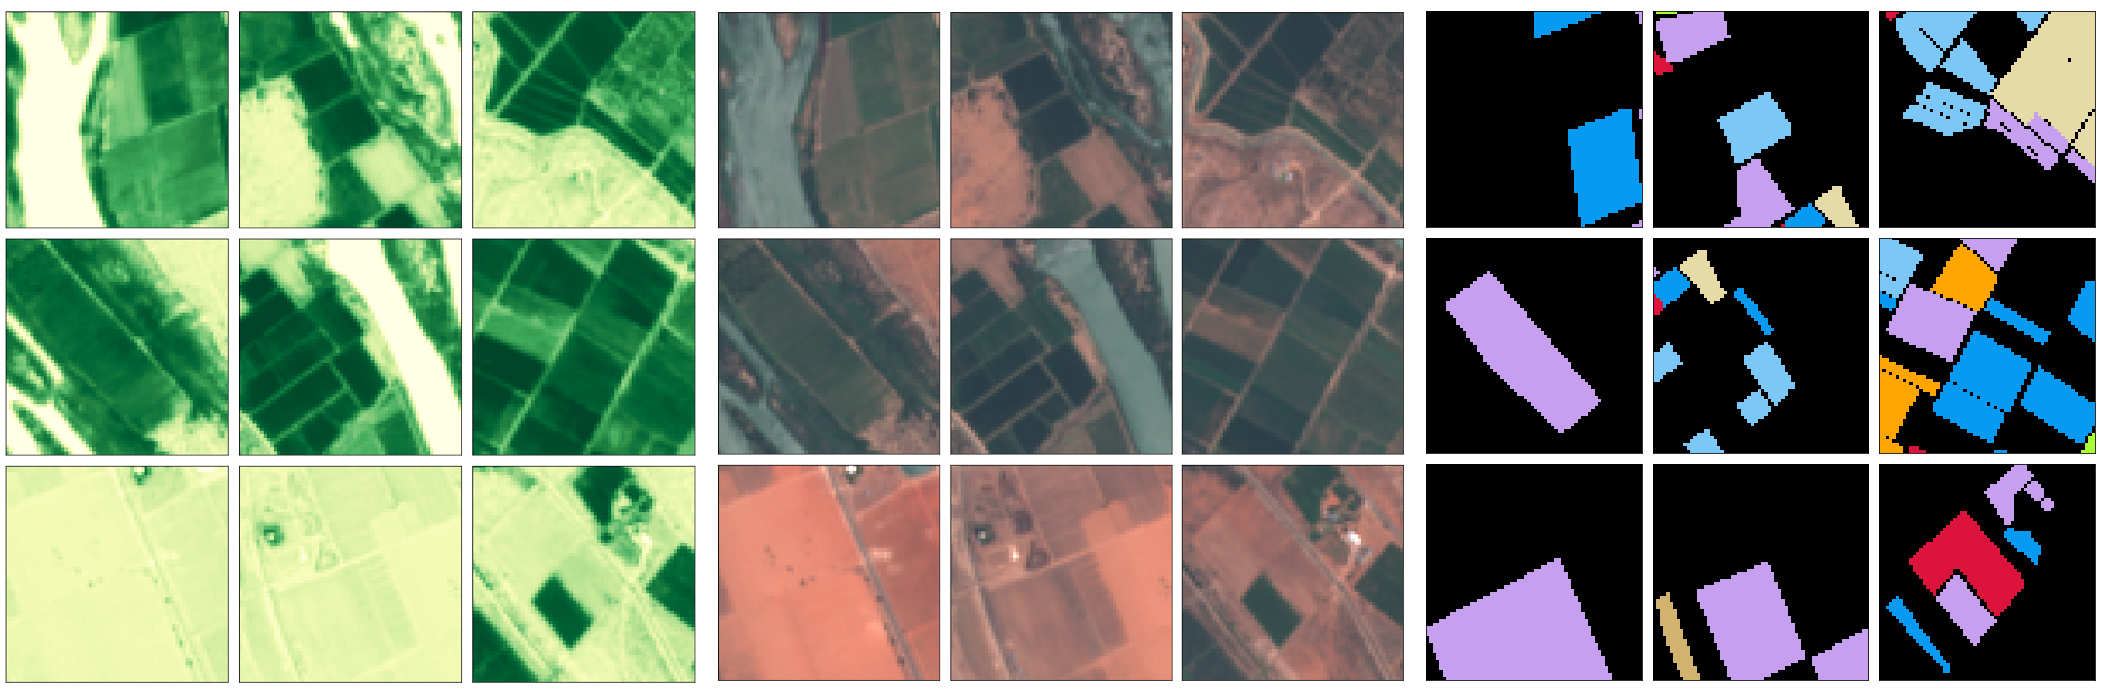 NDVI and visible images at a single time point along with the corresponding target crop types for nine randomly sampled 64x64 training ‘patchlets’